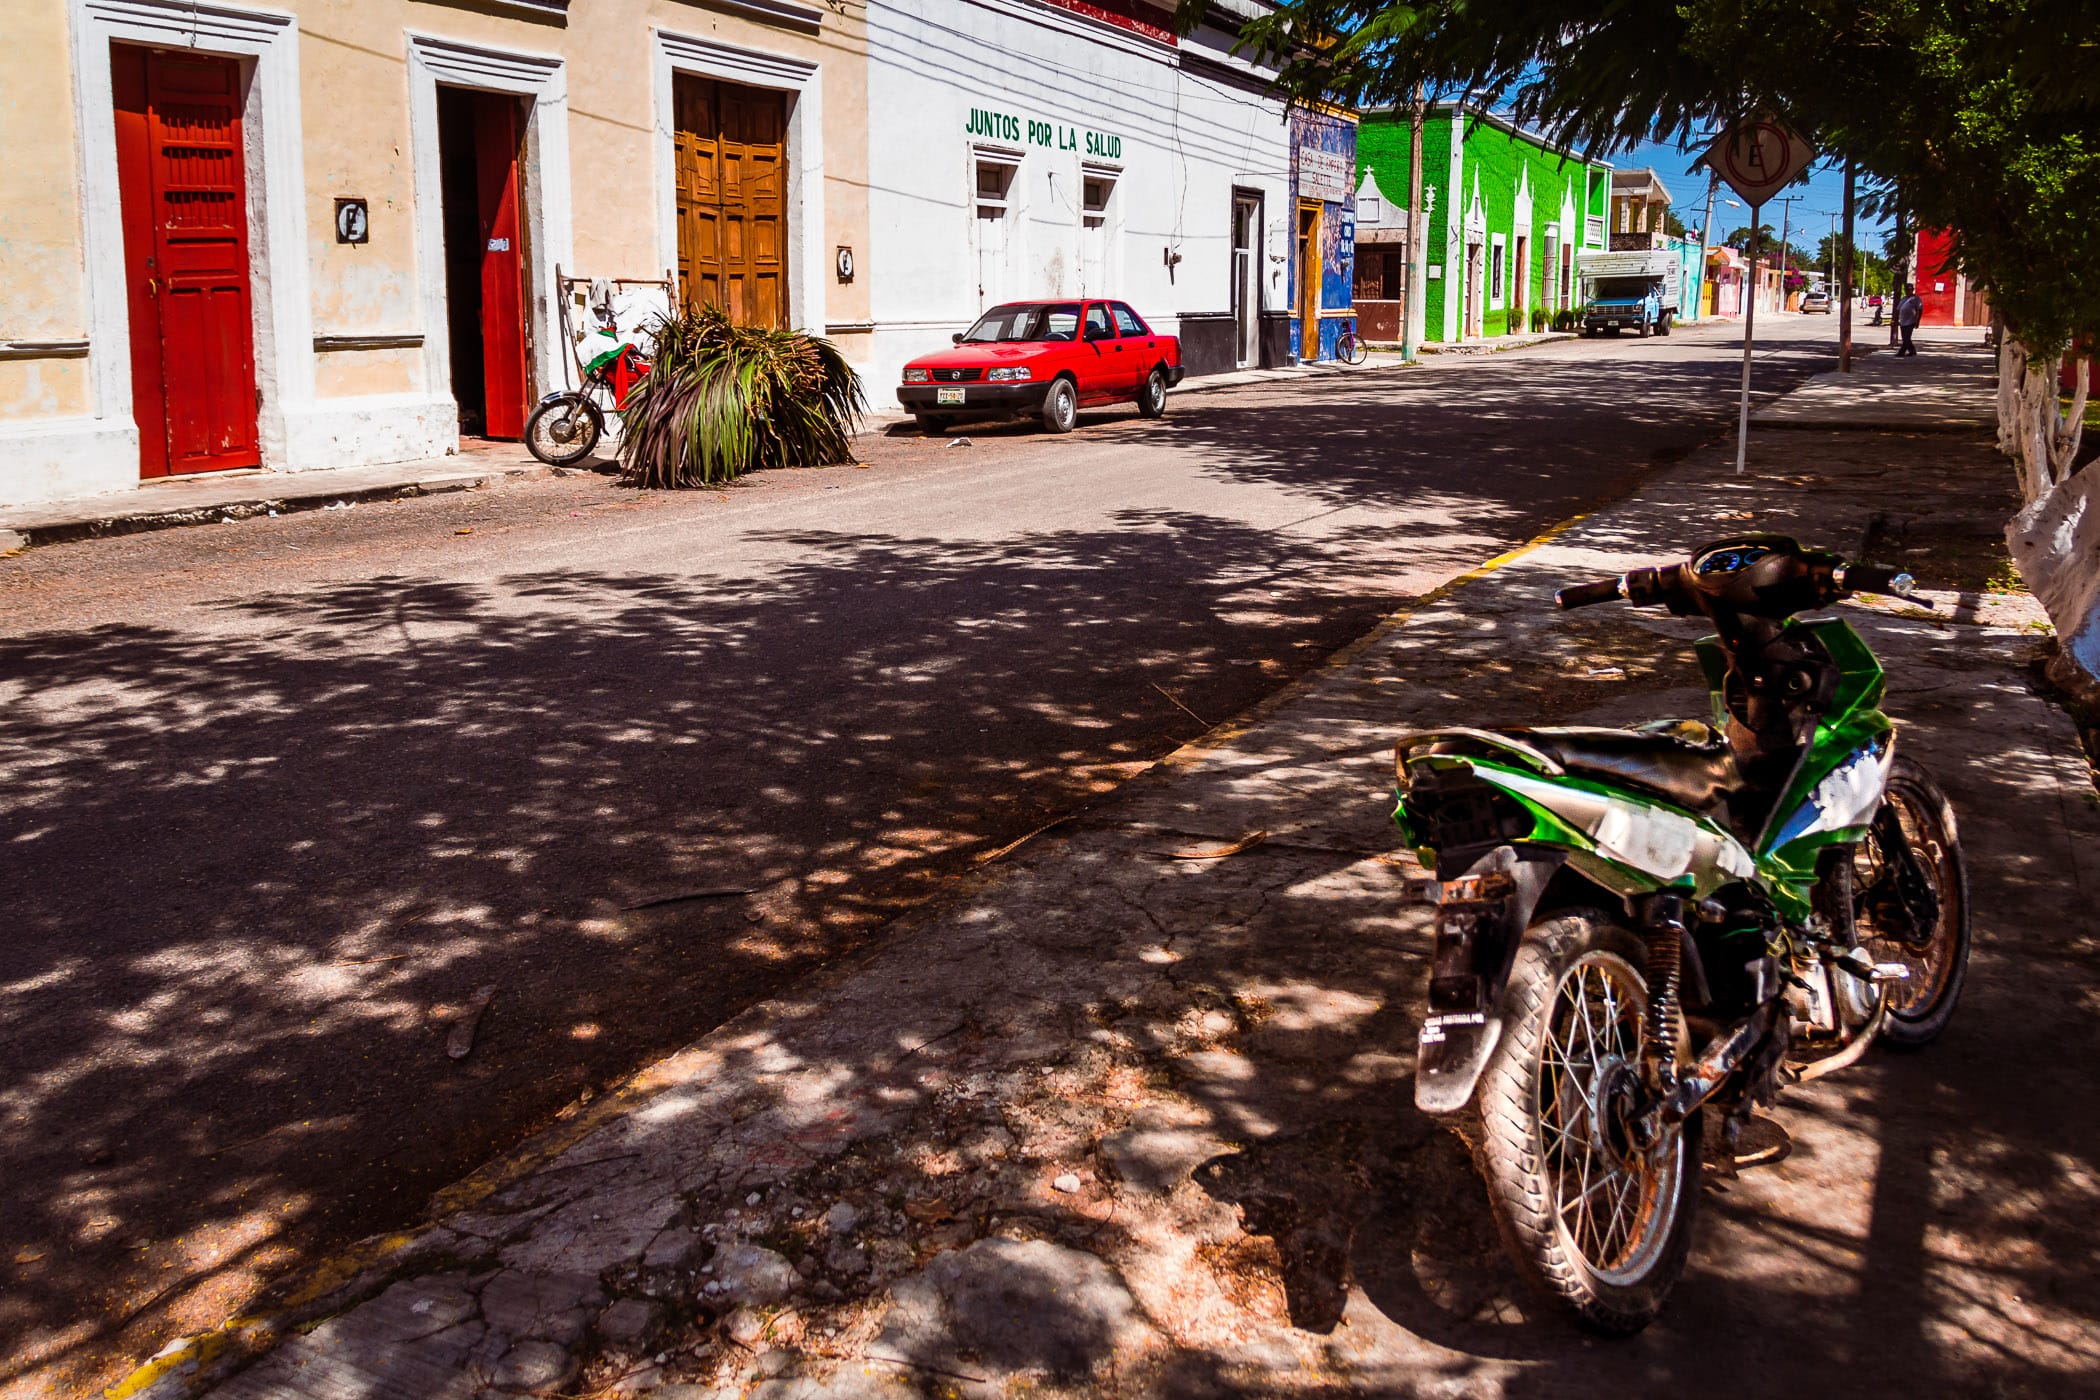 A motorcycle sits in the shade on a street in the village of Dzemul, Yucatan, Mexico.